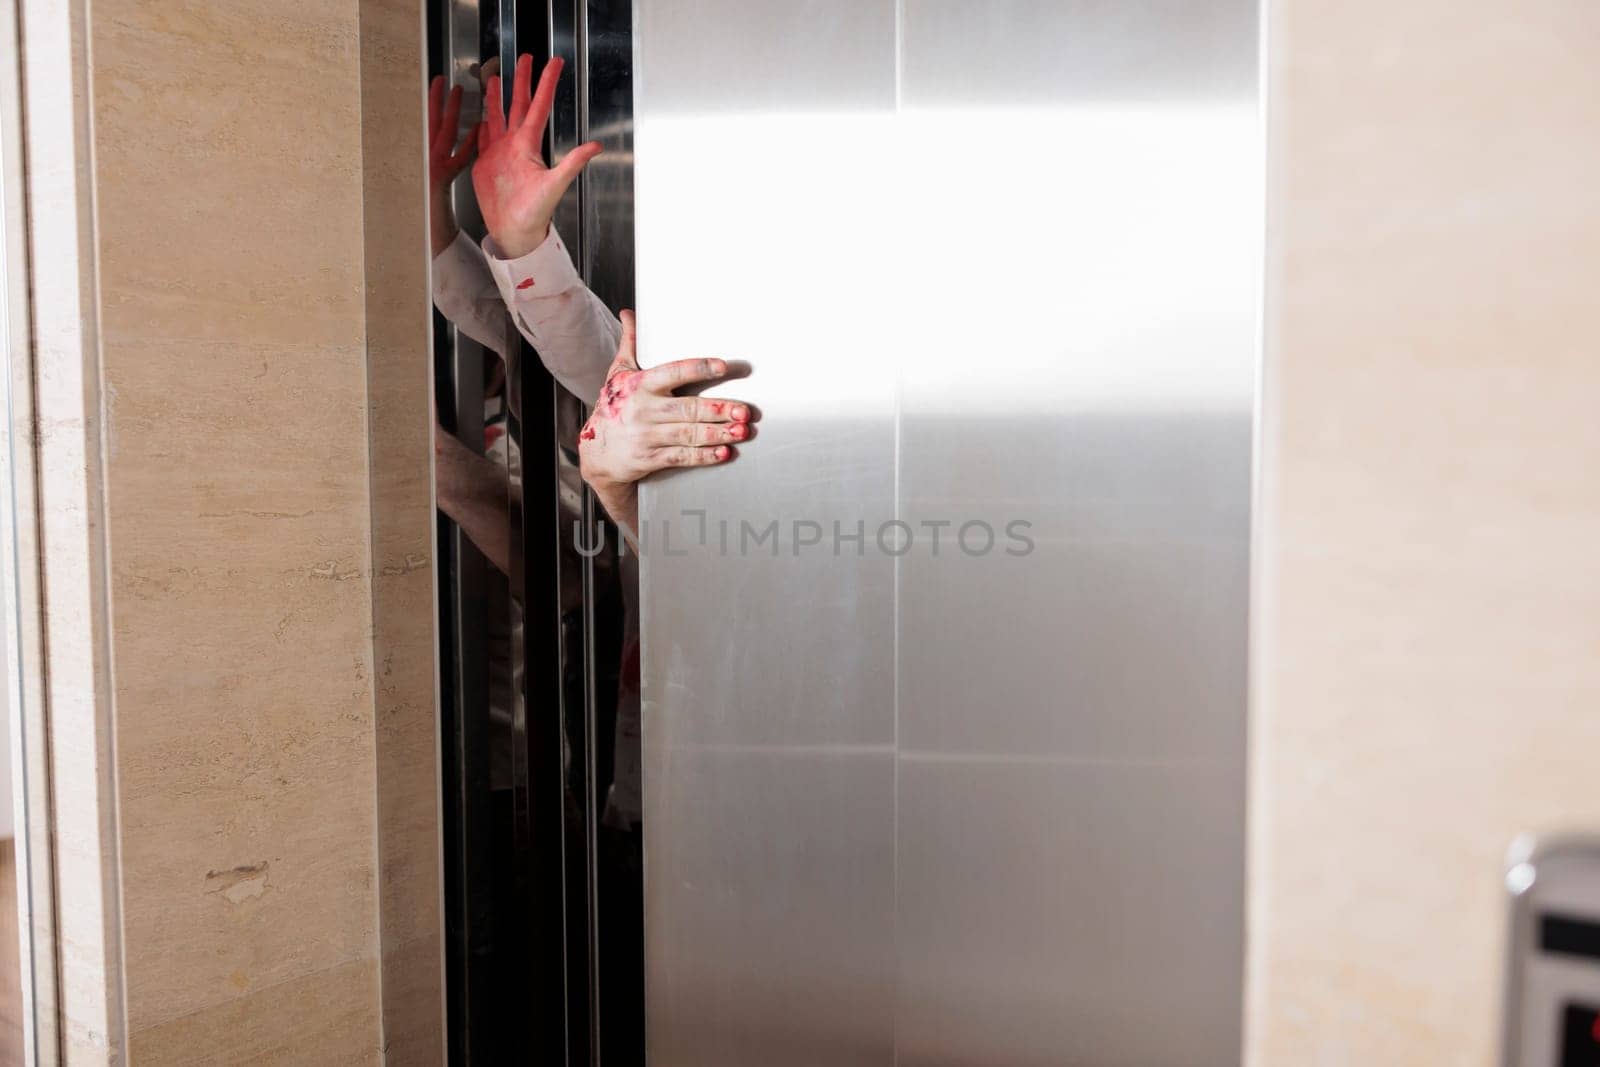 Demonic zombies hands opening office elevator, coming out to infect more people by DCStudio